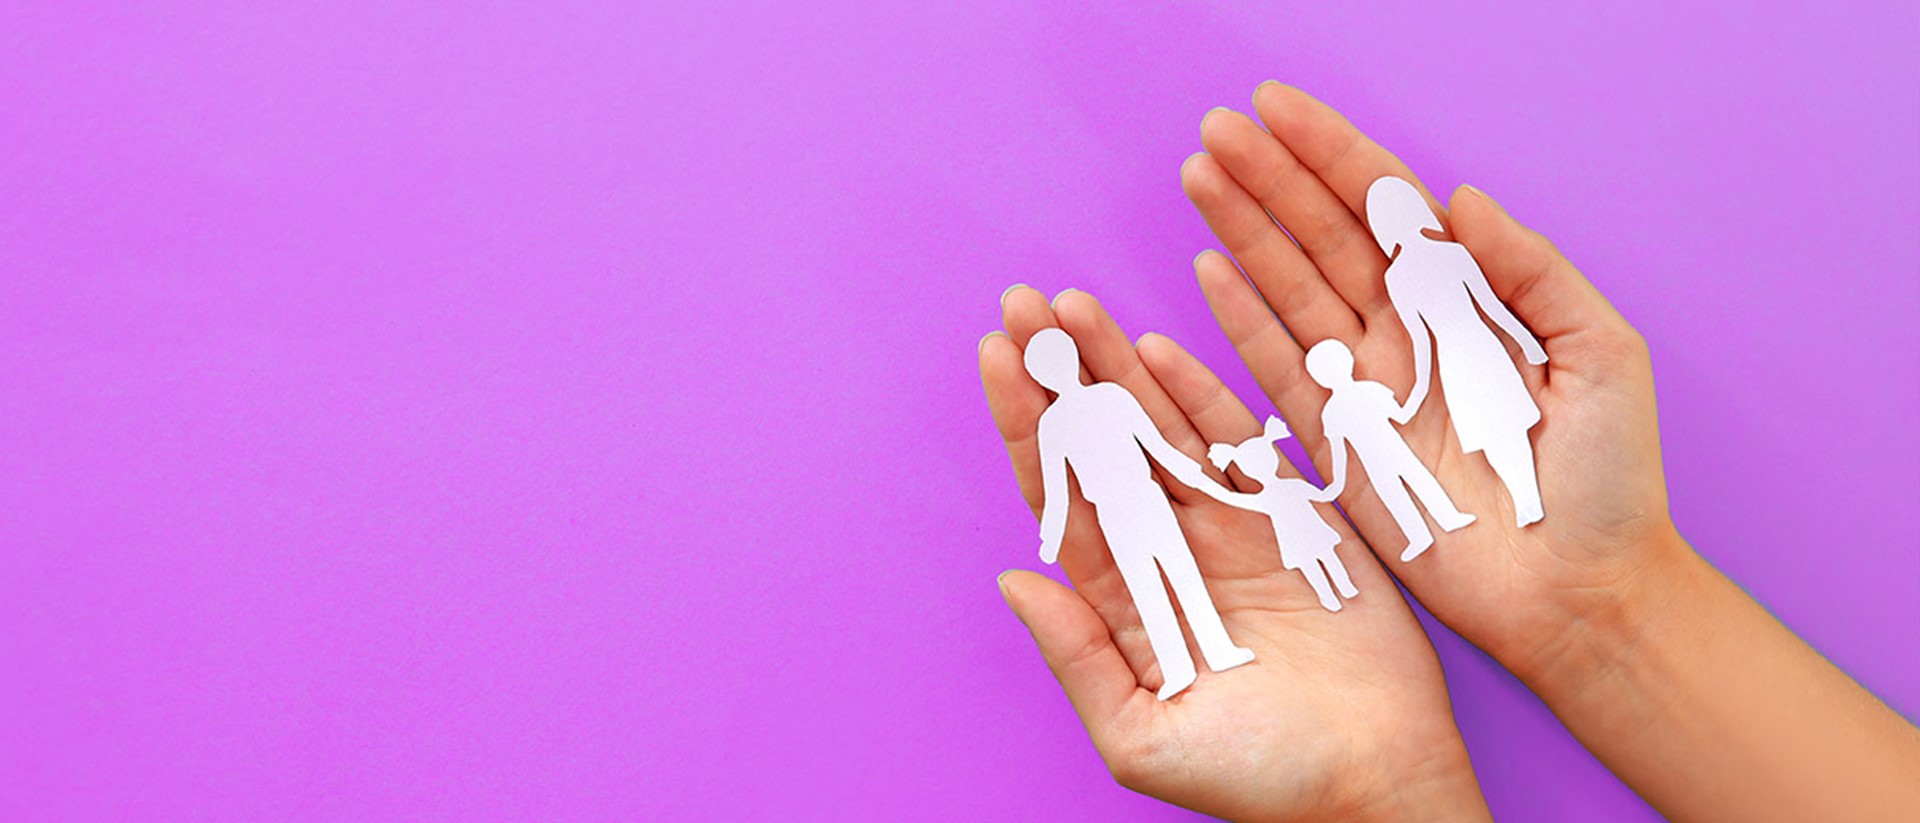 Image of a paper cutout in the shape of a family within a pair of hands on a purple background